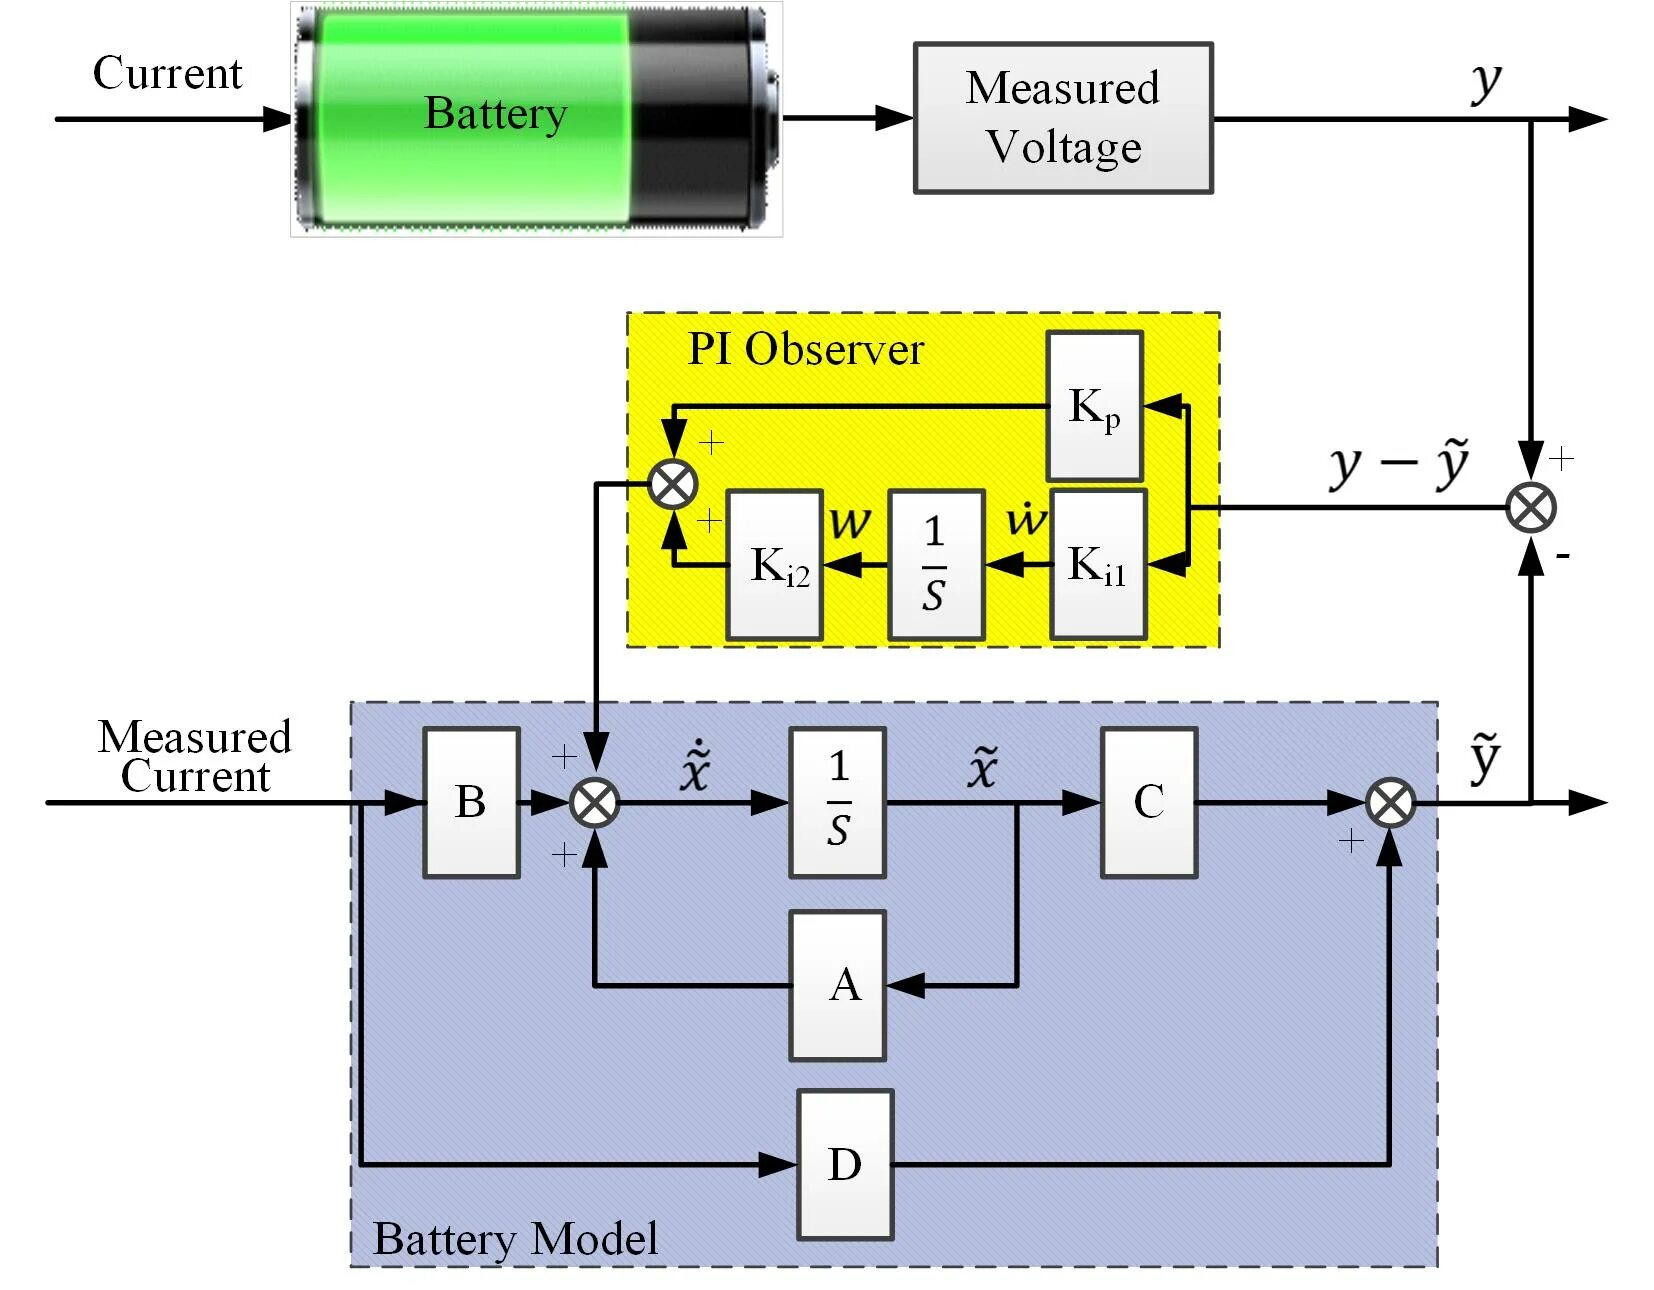 Battery Electric scheme. Electric vehicle Battery. Battery Management System schematic. Battery scheme.